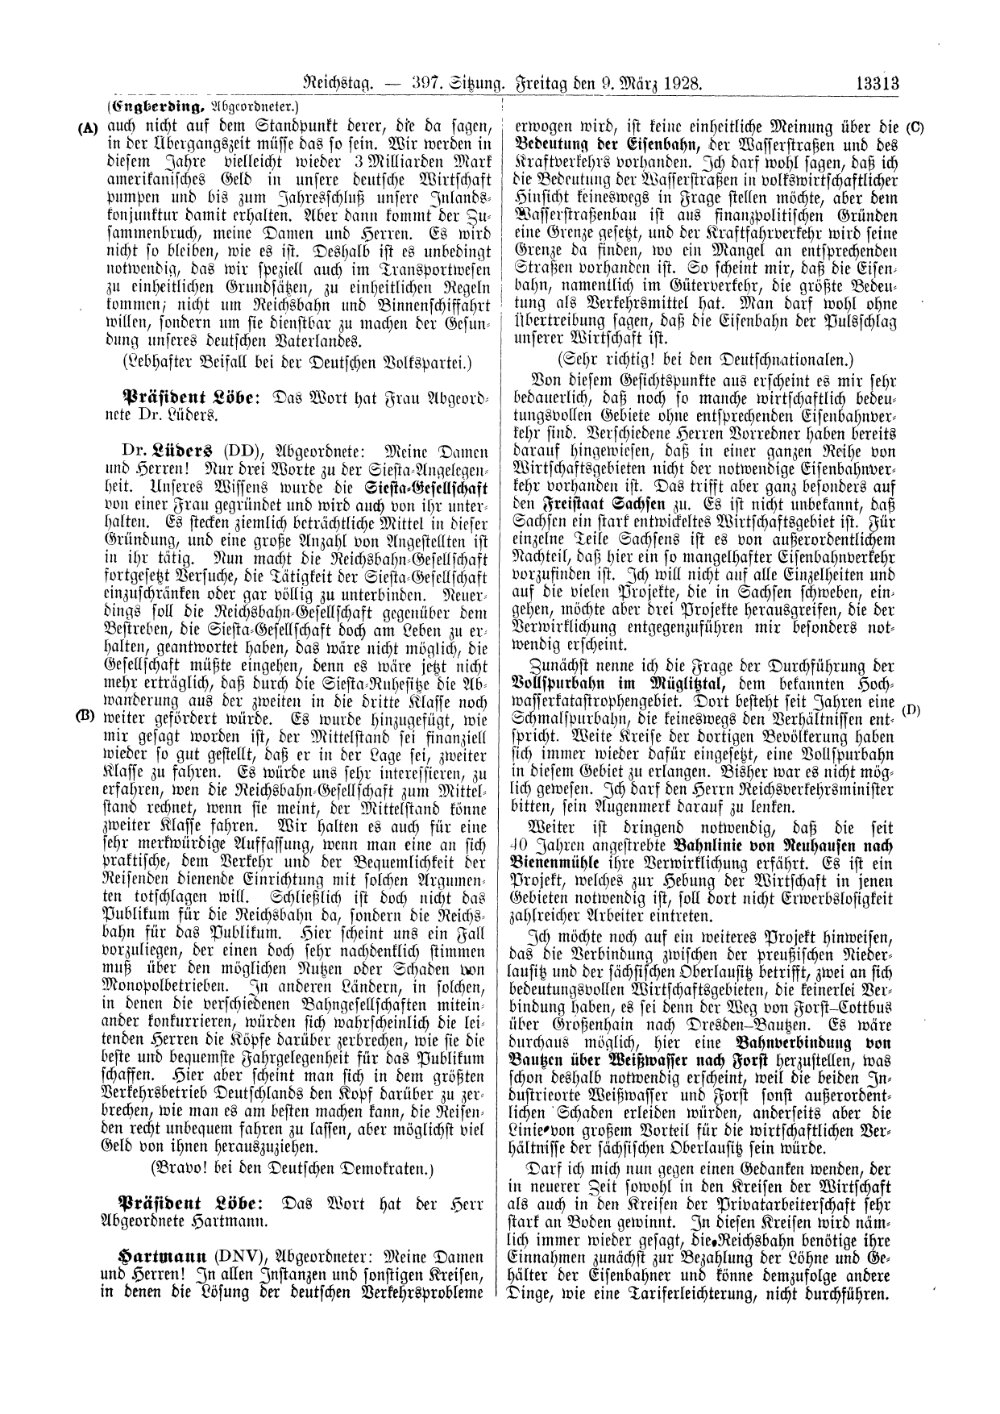 Scan of page 13313